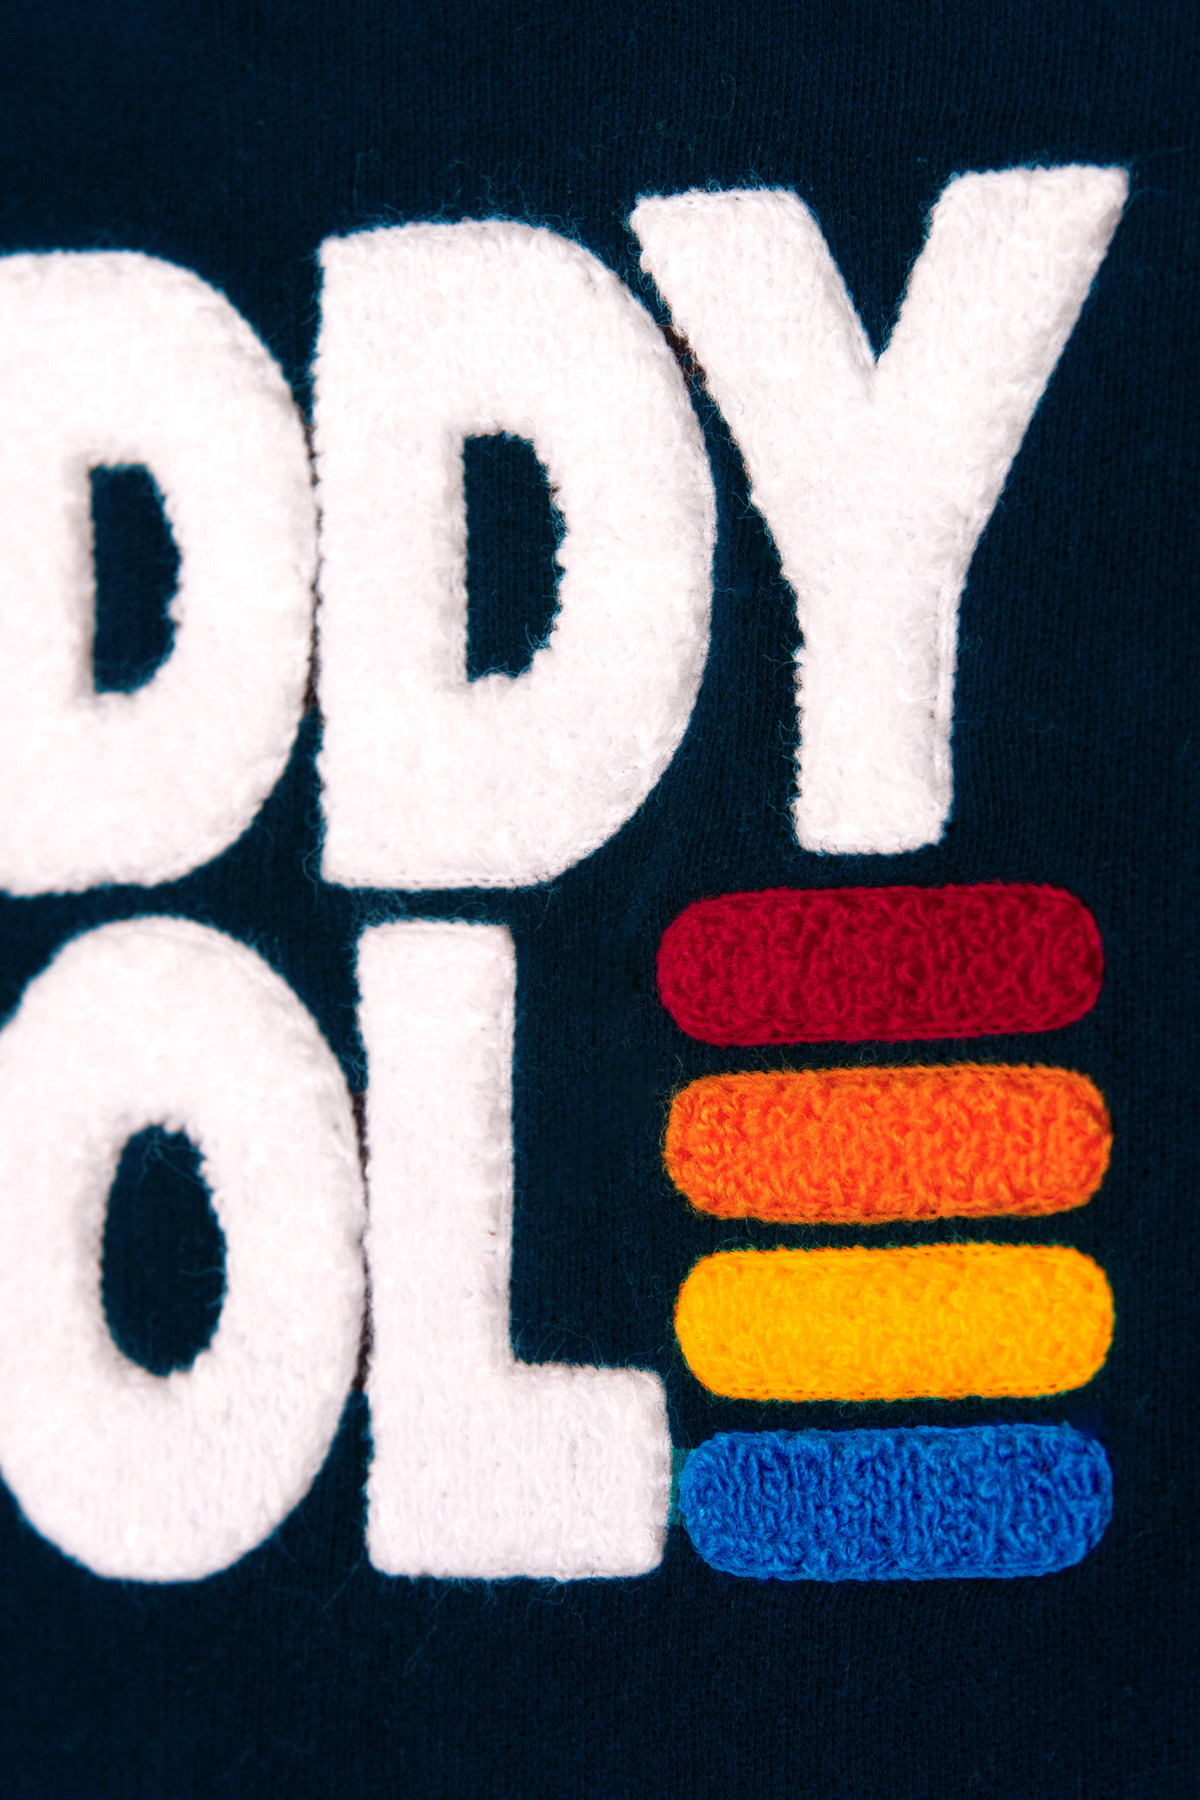 Sweat Dylan DADDY COOL (Broderie)